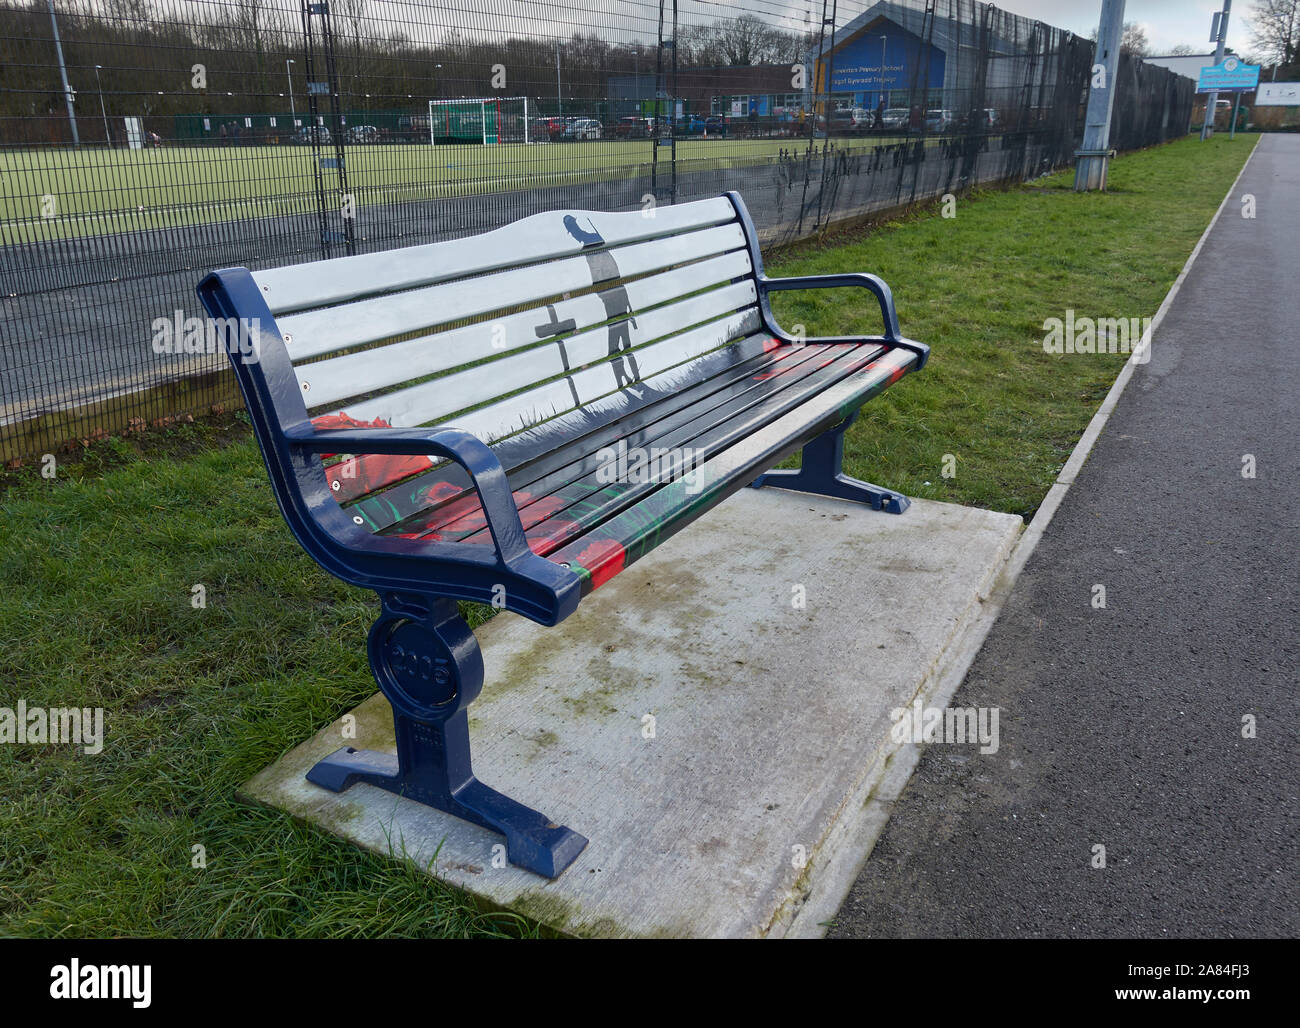 'Help for Heroes' bench at the Elba playing fields, Gowerton, Swansea, Wales. Stock Photo